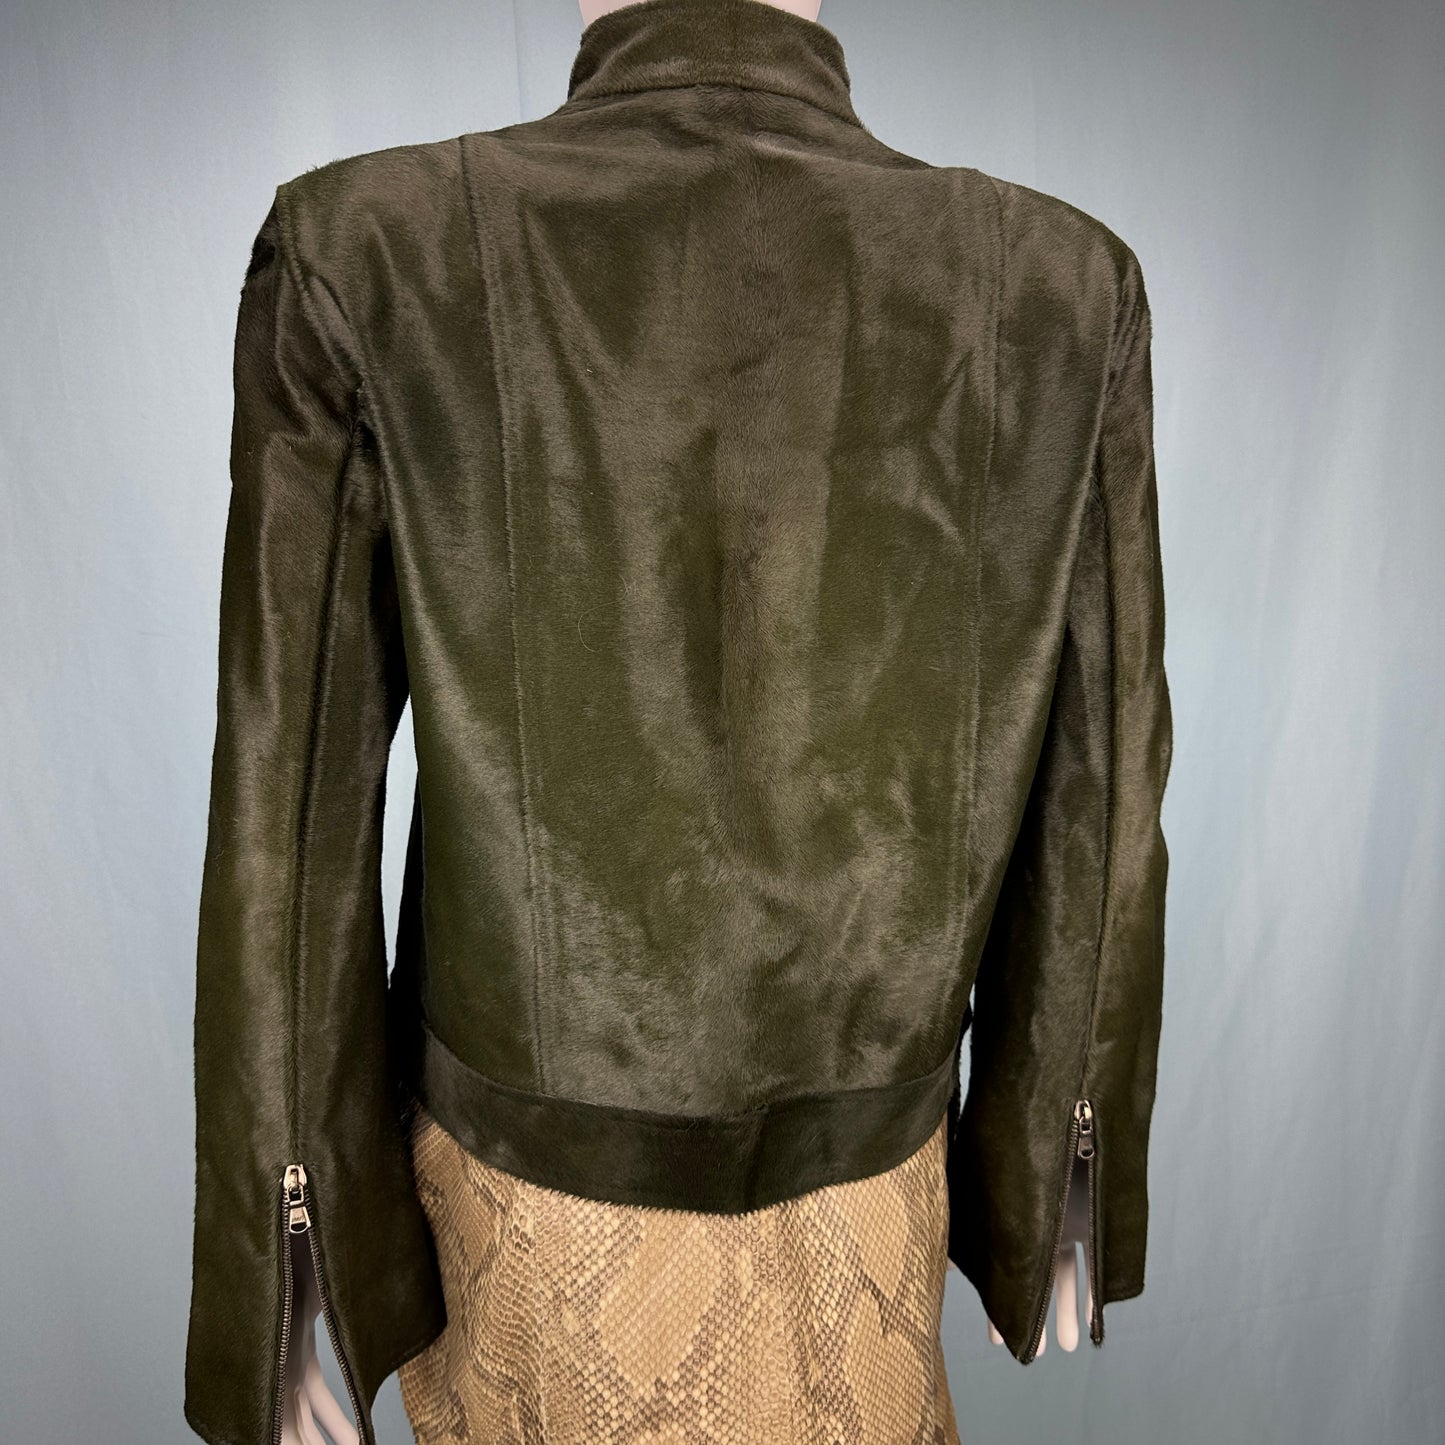 Gucci Fall 1997 Ponyhair Leather Jacket